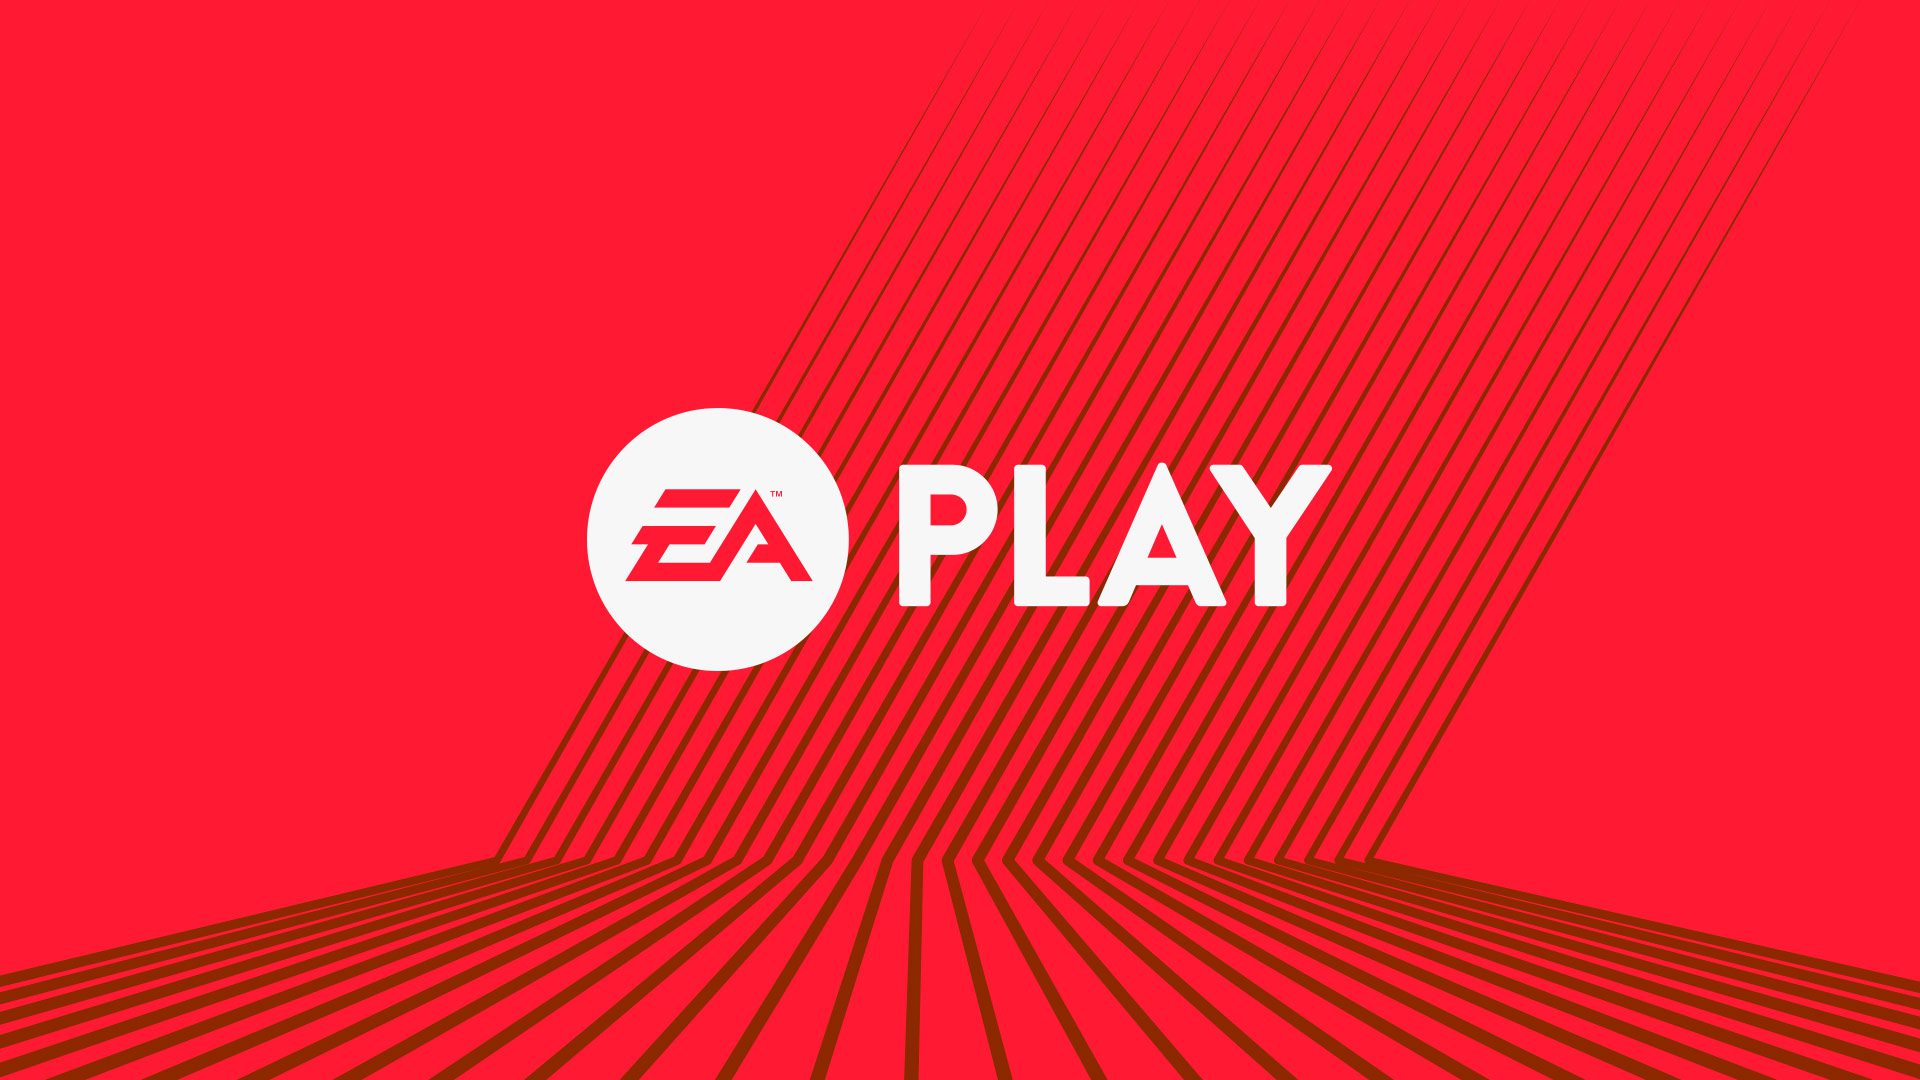 EA Play 2019 Won’t Have An E3 Press Conference